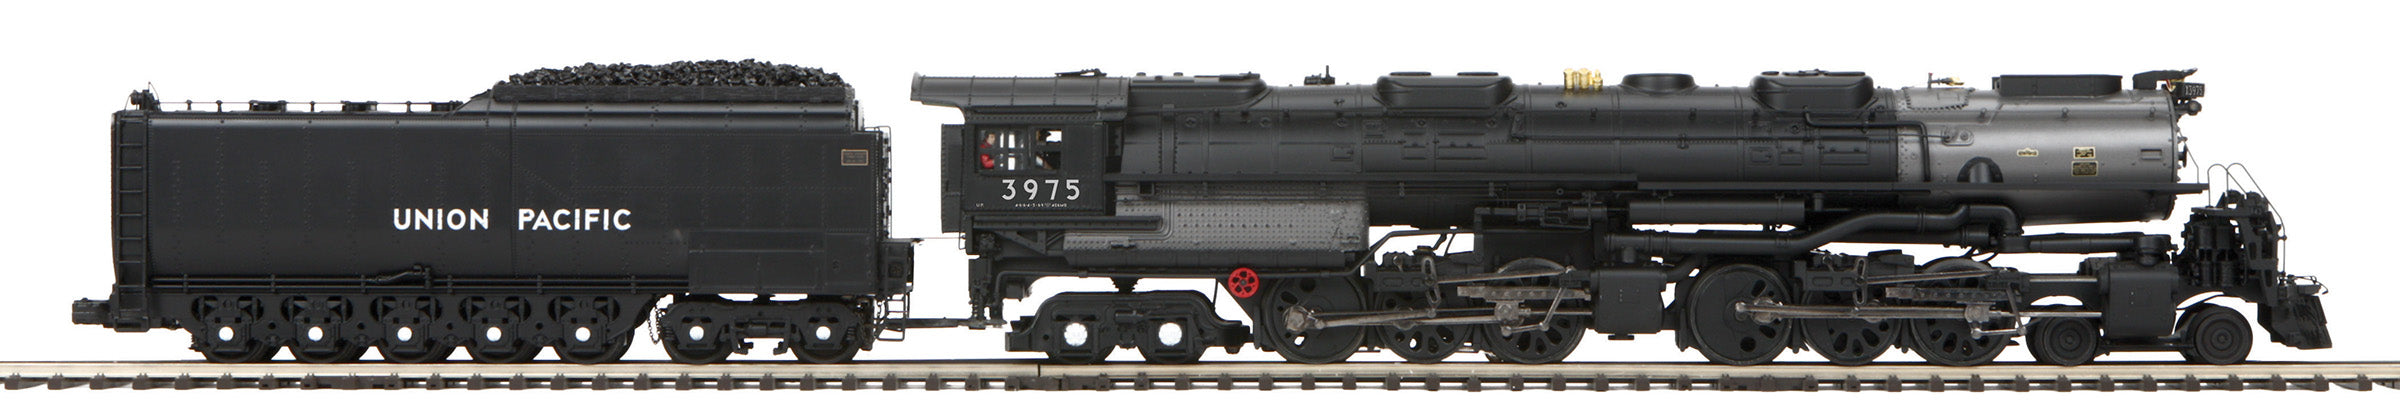 MTH 20-3892-1 - 4-6-6-4 Challenger Steam Engine "Union Pacific" #3975 w/ PS3 (Black - Coal Tender)